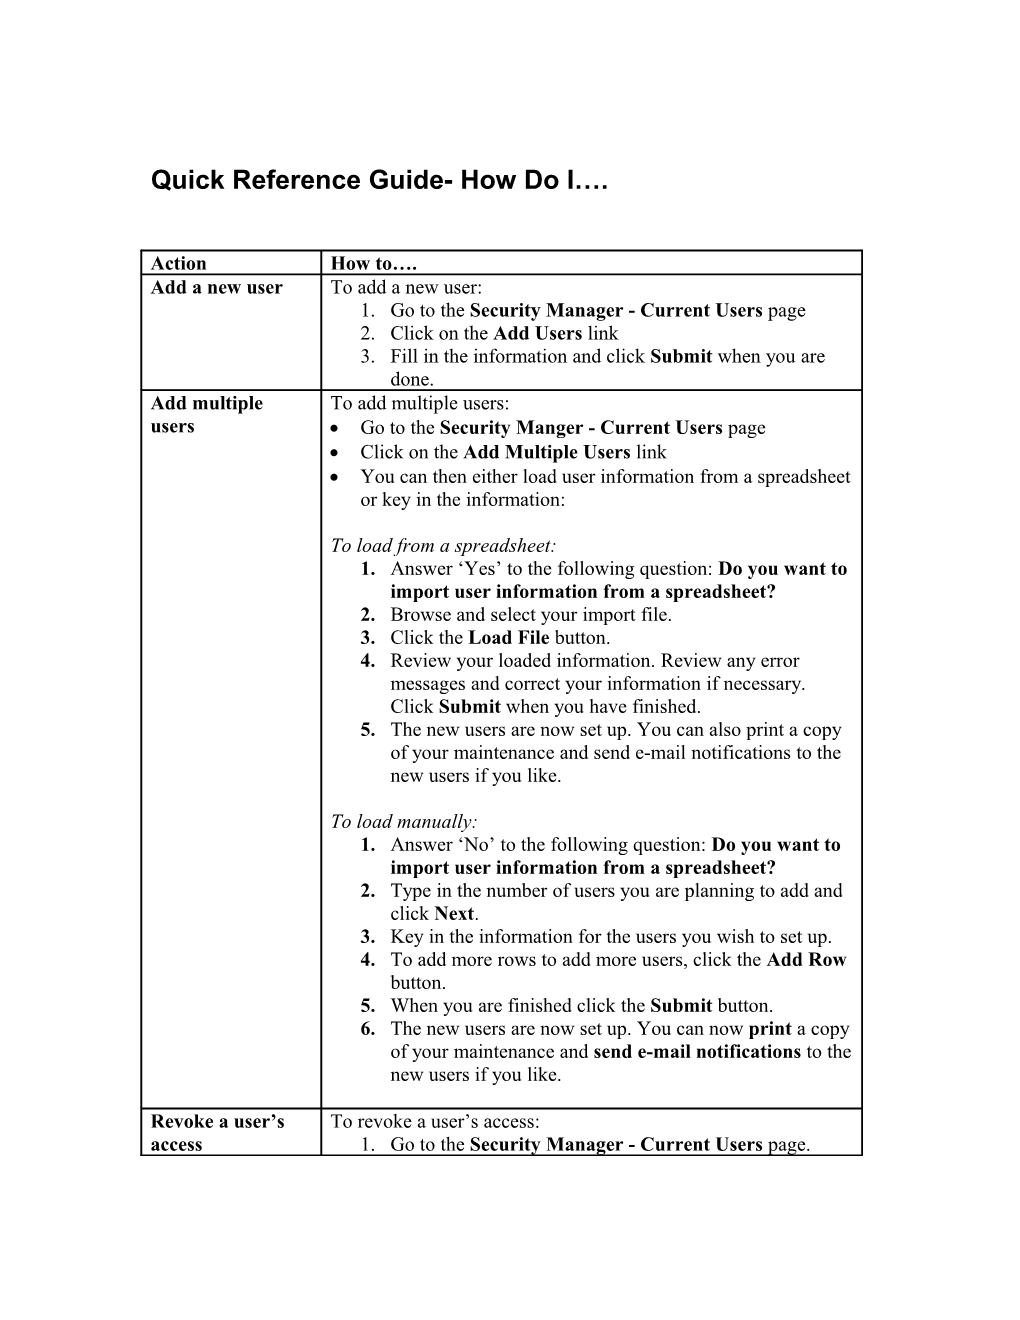 Quick Reference Guide- How Do I